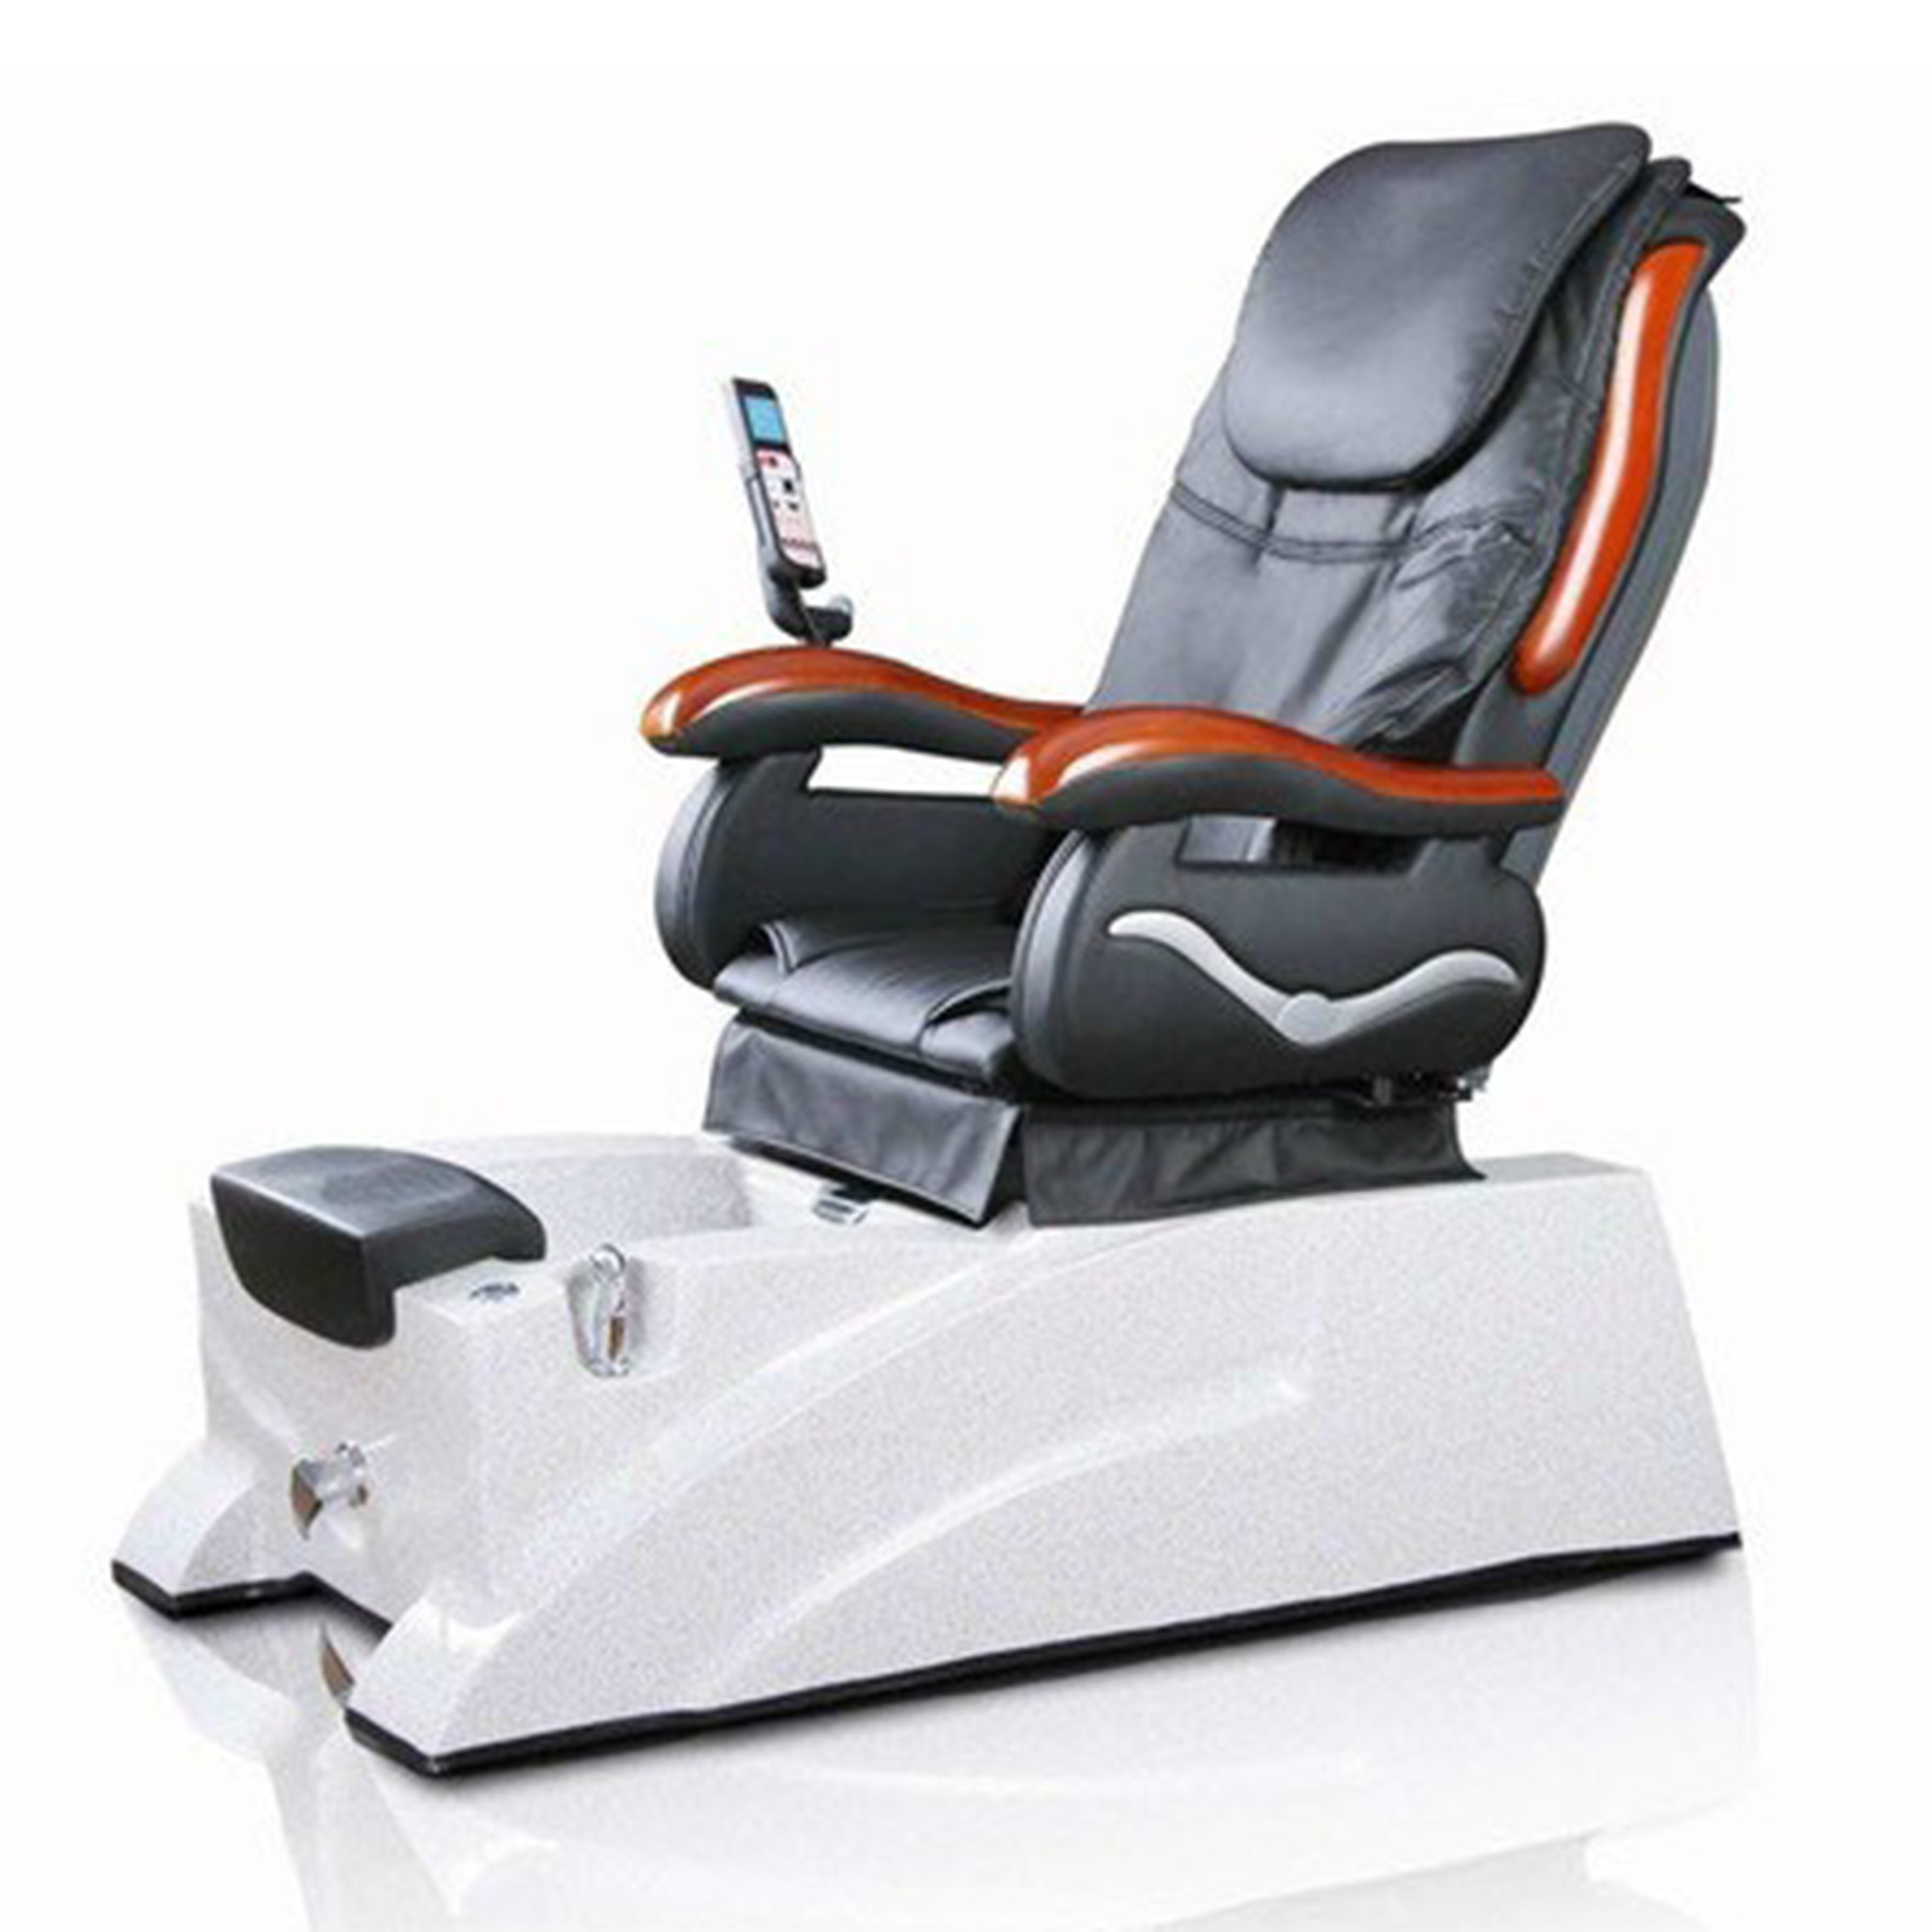 Comfort Pedicure Chair Furniture Stations in Surat